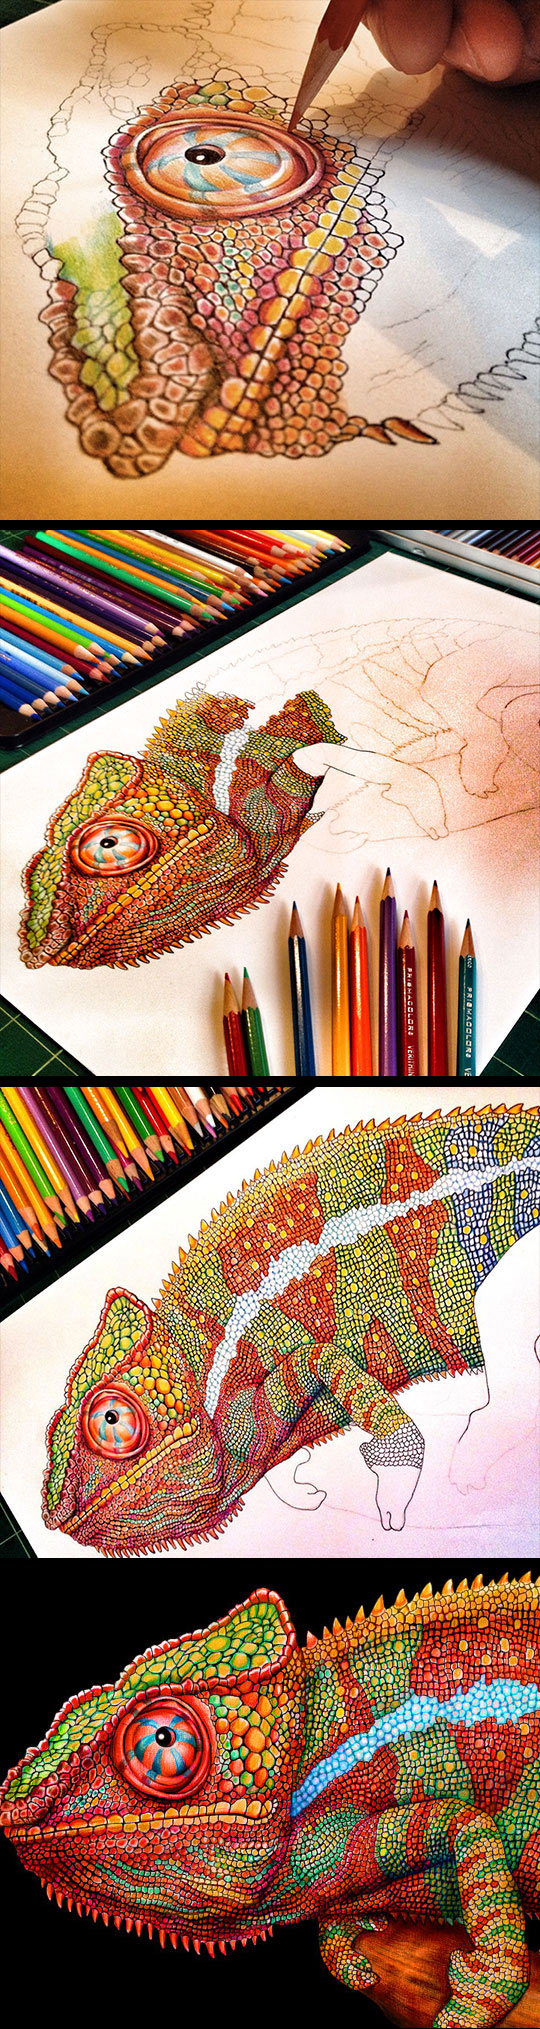 The Most Detailed Drawing Of A Chameleon